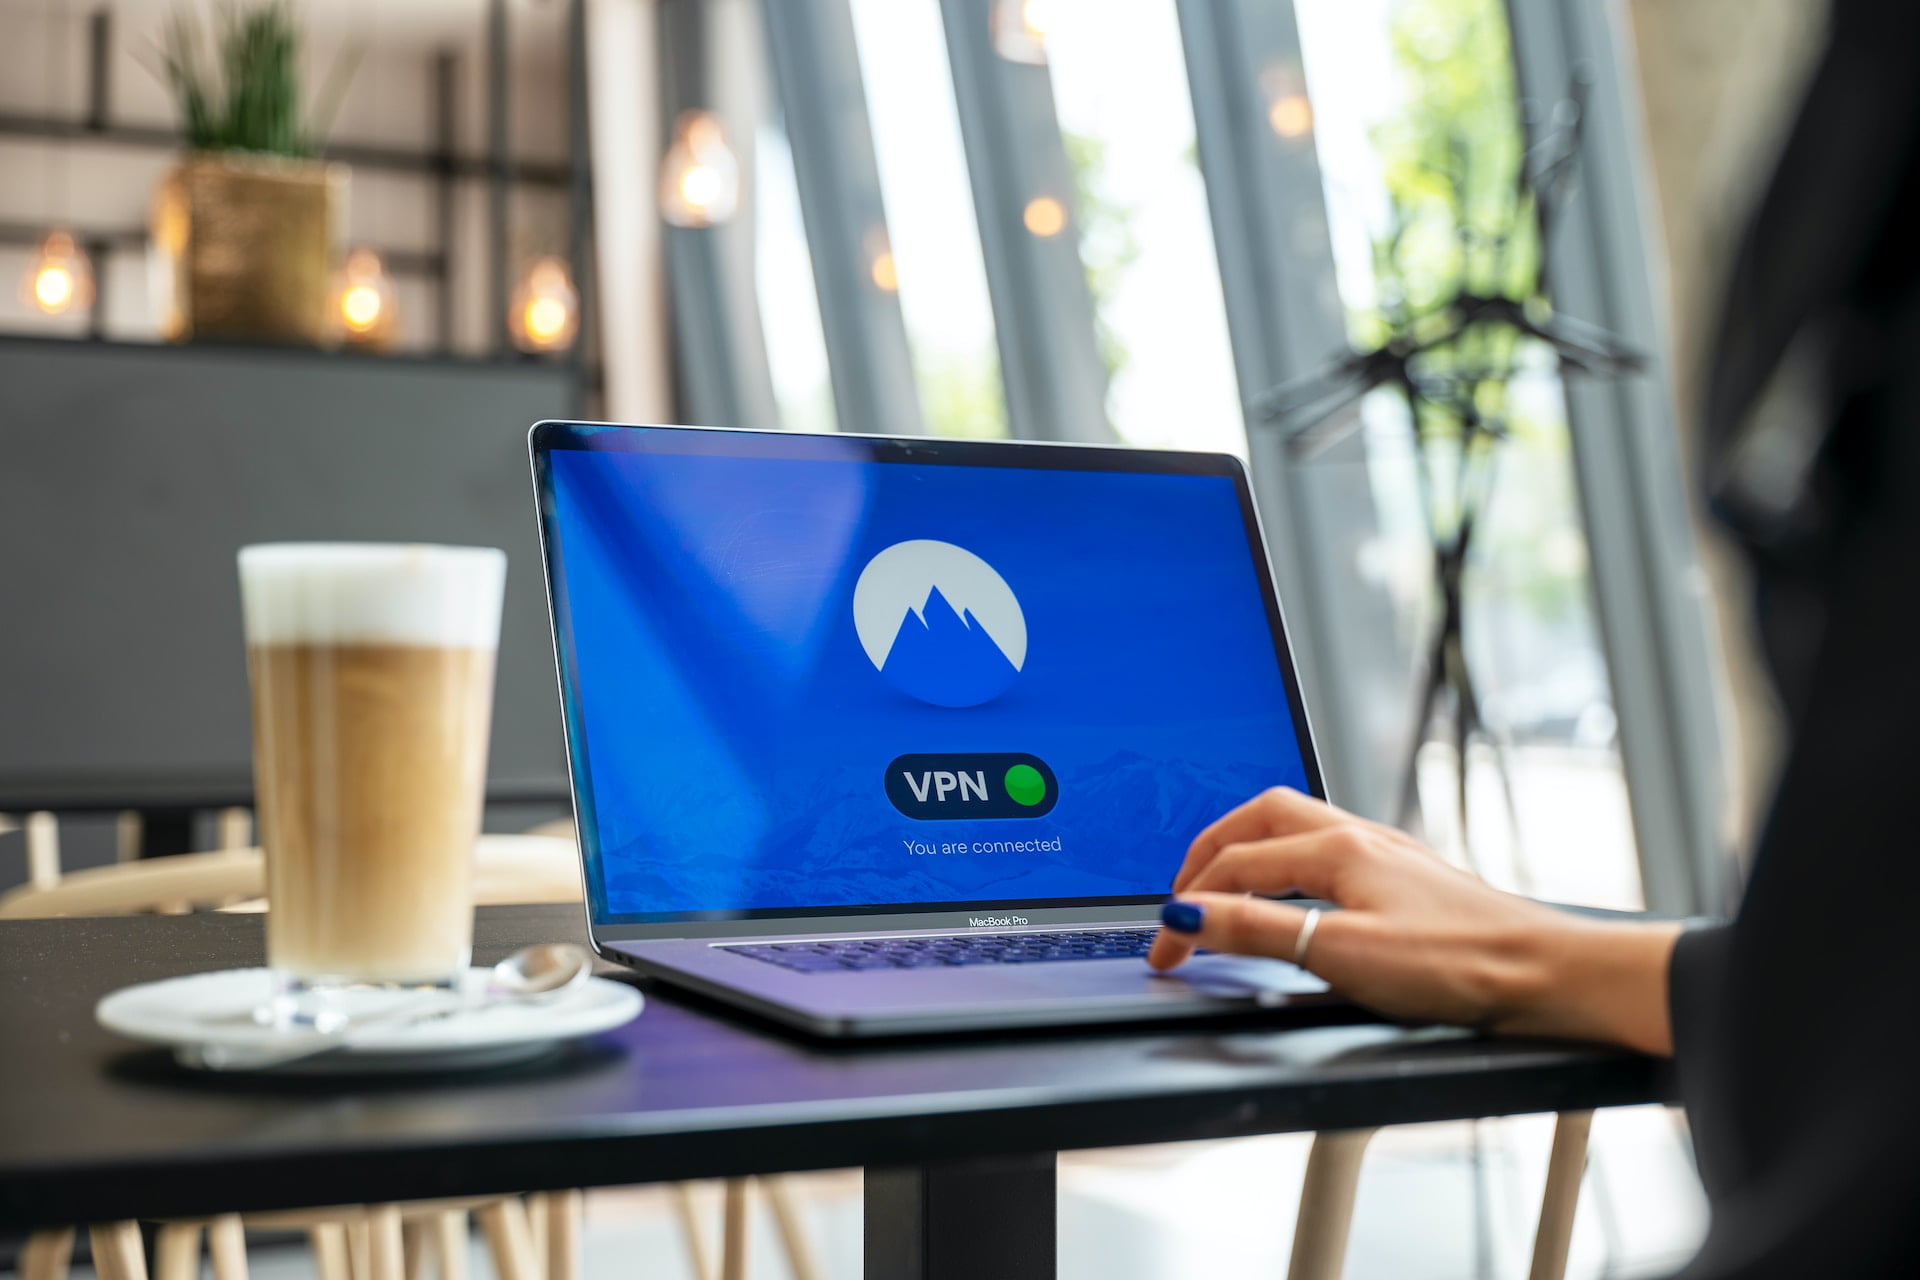 Benefits of VPN: 7 Surprising Ways Using a VPN Can Protect Your Privacy